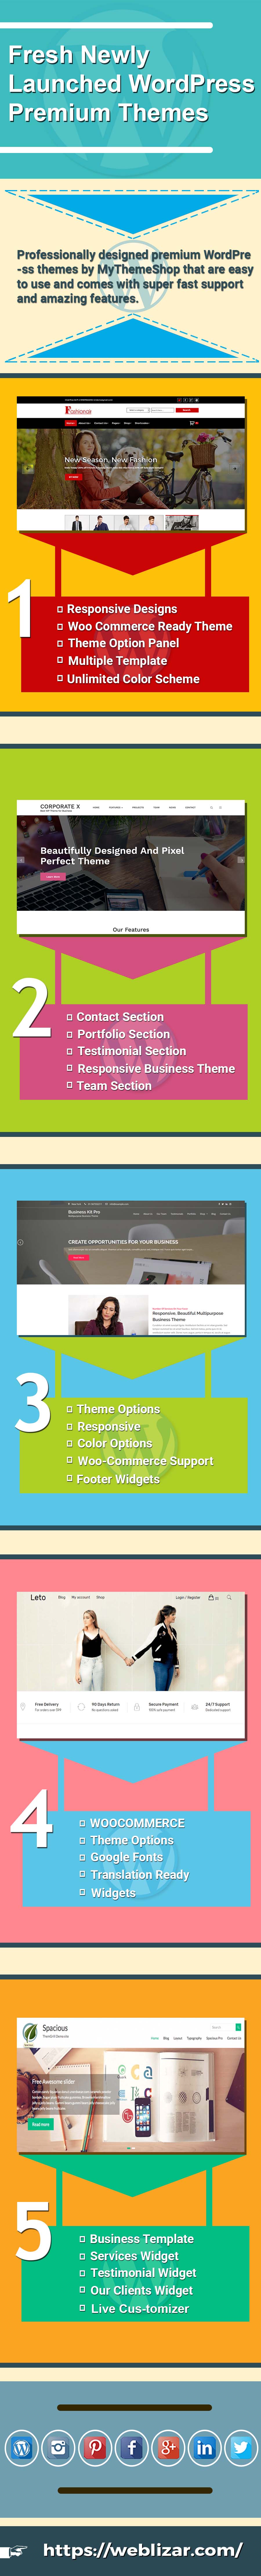 5 newly launched wordpress themes infographic